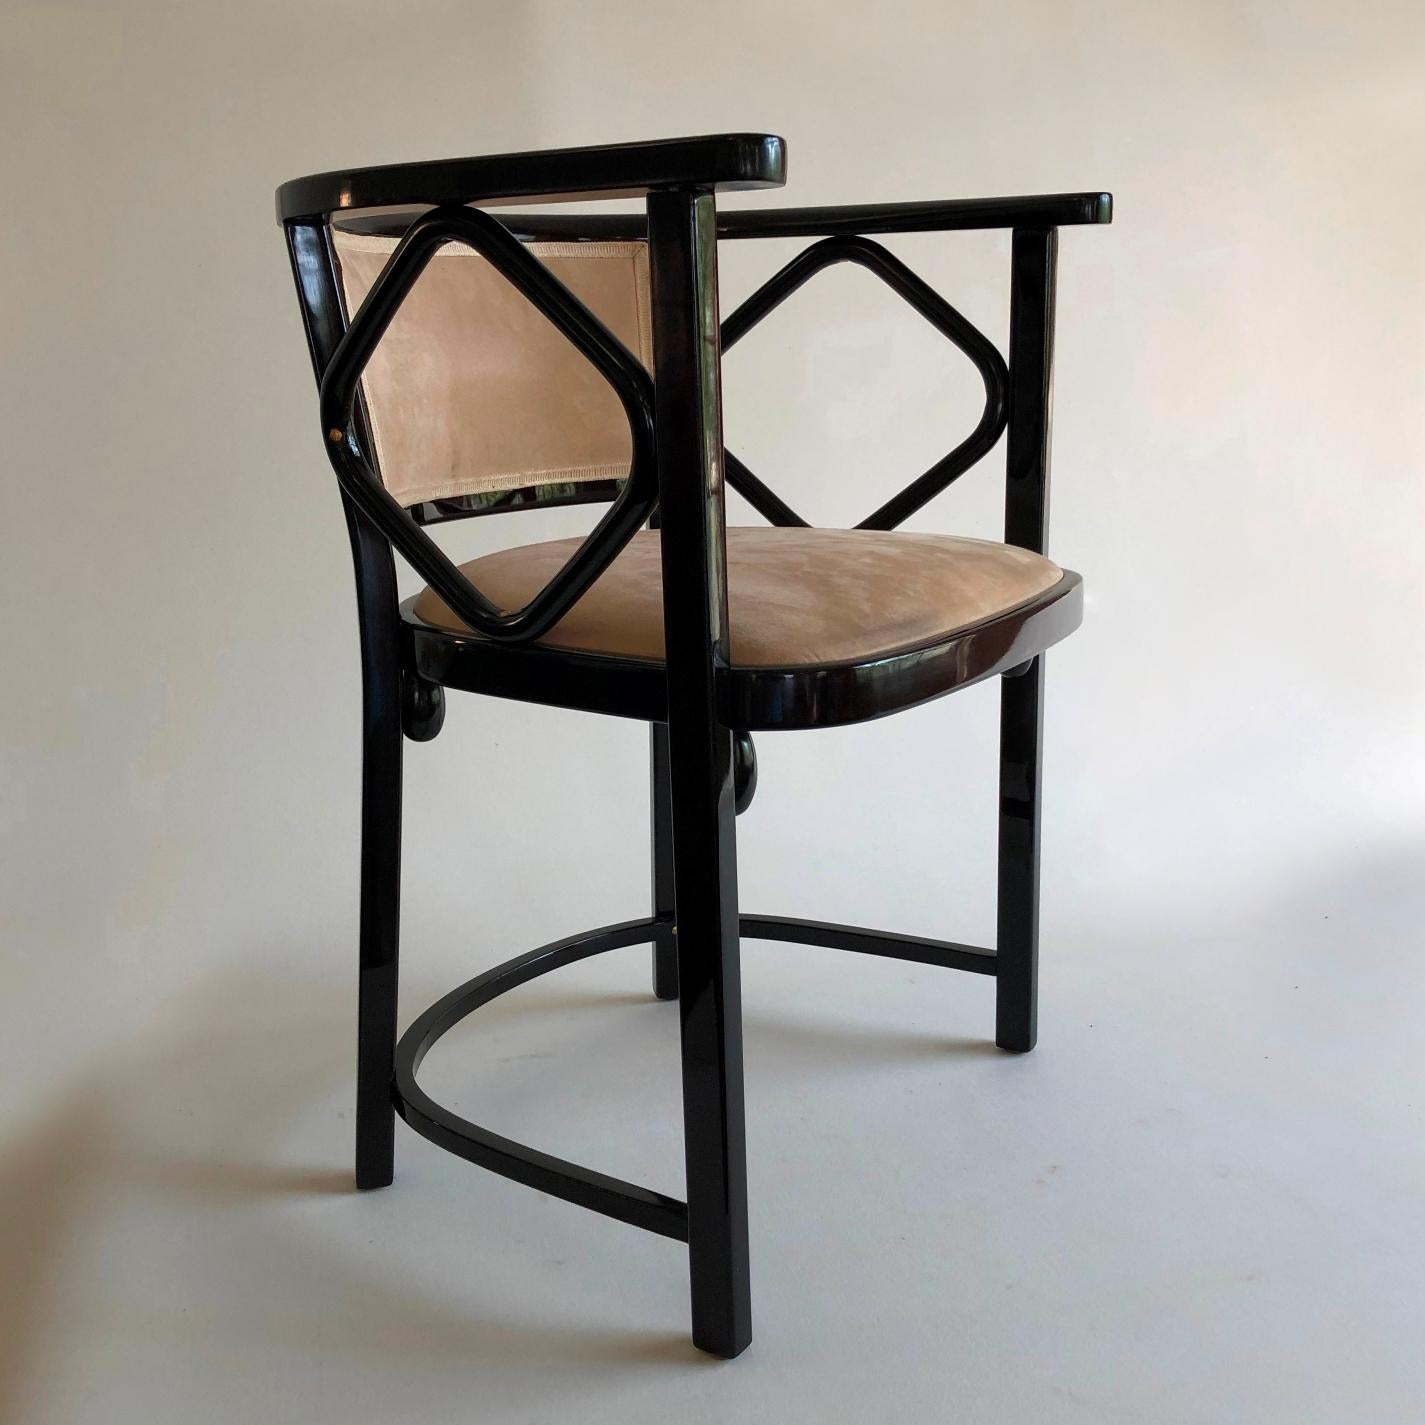 12 Josef Hoffmann Attributed Thonet Bentwood Fledermaus Chairs, Austria, 1930s For Sale 8